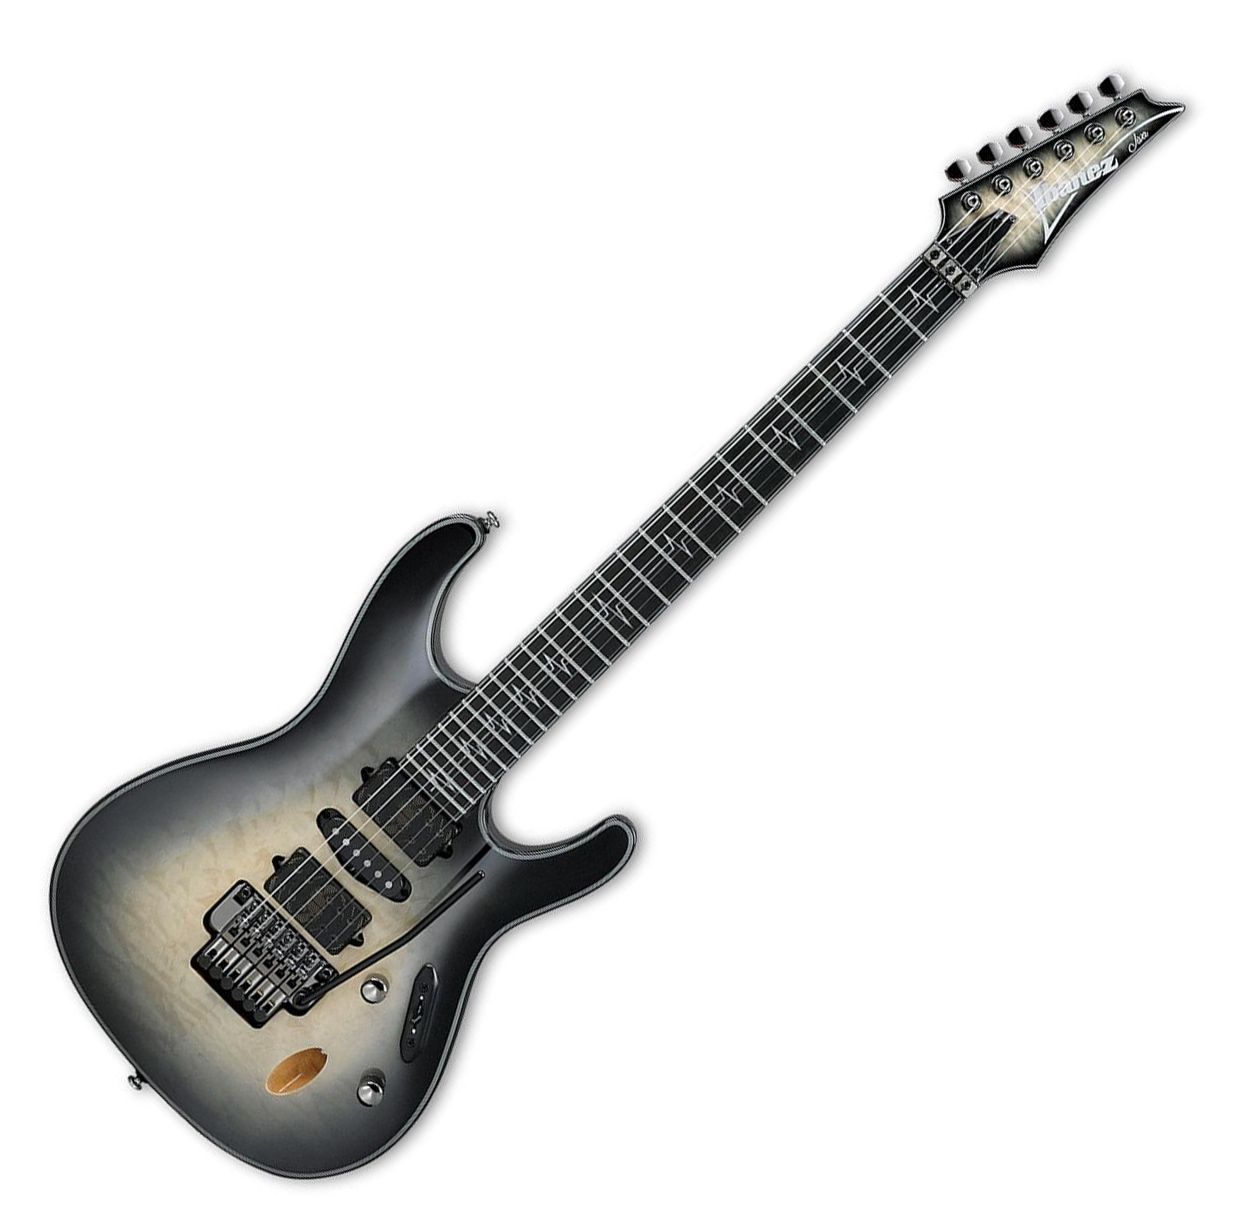 A product shot of an electric guitar. It's black around the edges and fades into raw maple in the middle of the body as well as the headstock, and has three pickups (two humbuckers and a single coil in the middle).